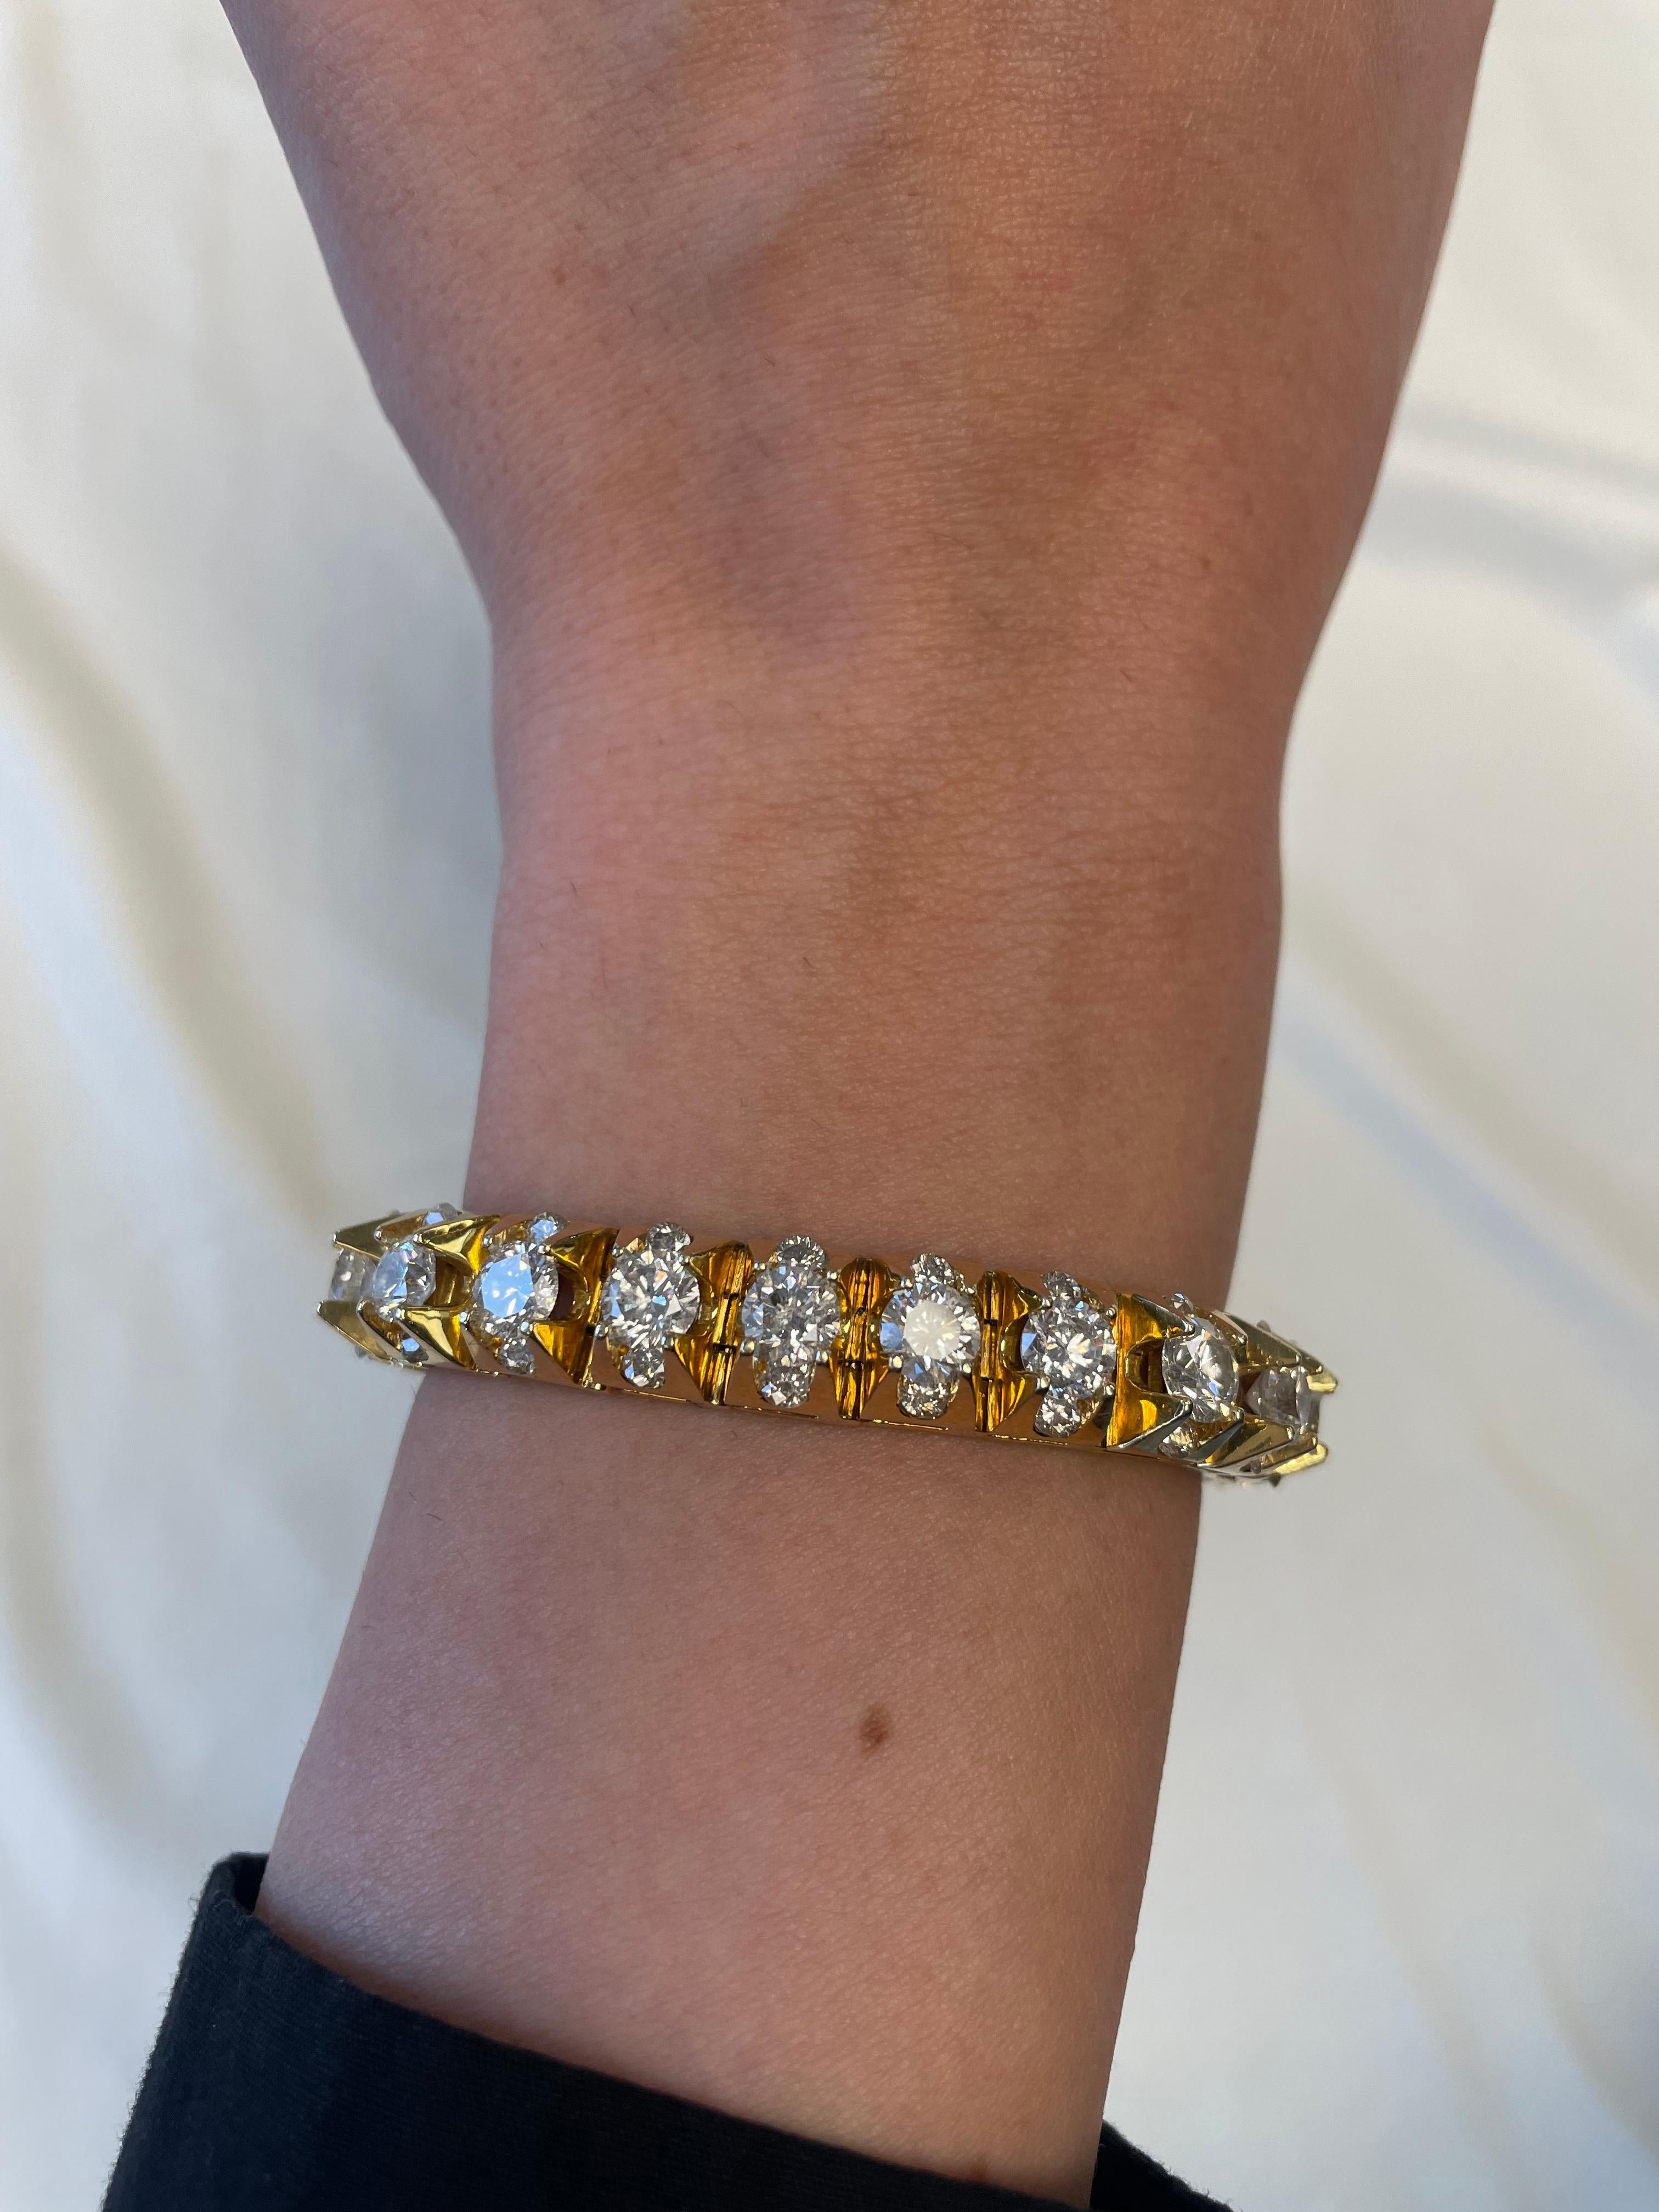 Vintage diamond bracelet, with diamonds set bellow and on top.
20.05 carats total diamond weight.
30 round brilliant diamonds, approximately, 14.10 carats, G/H color and SI clarity. 60 round brilliant diamonds, approximately, 5.95 carats, G/H color